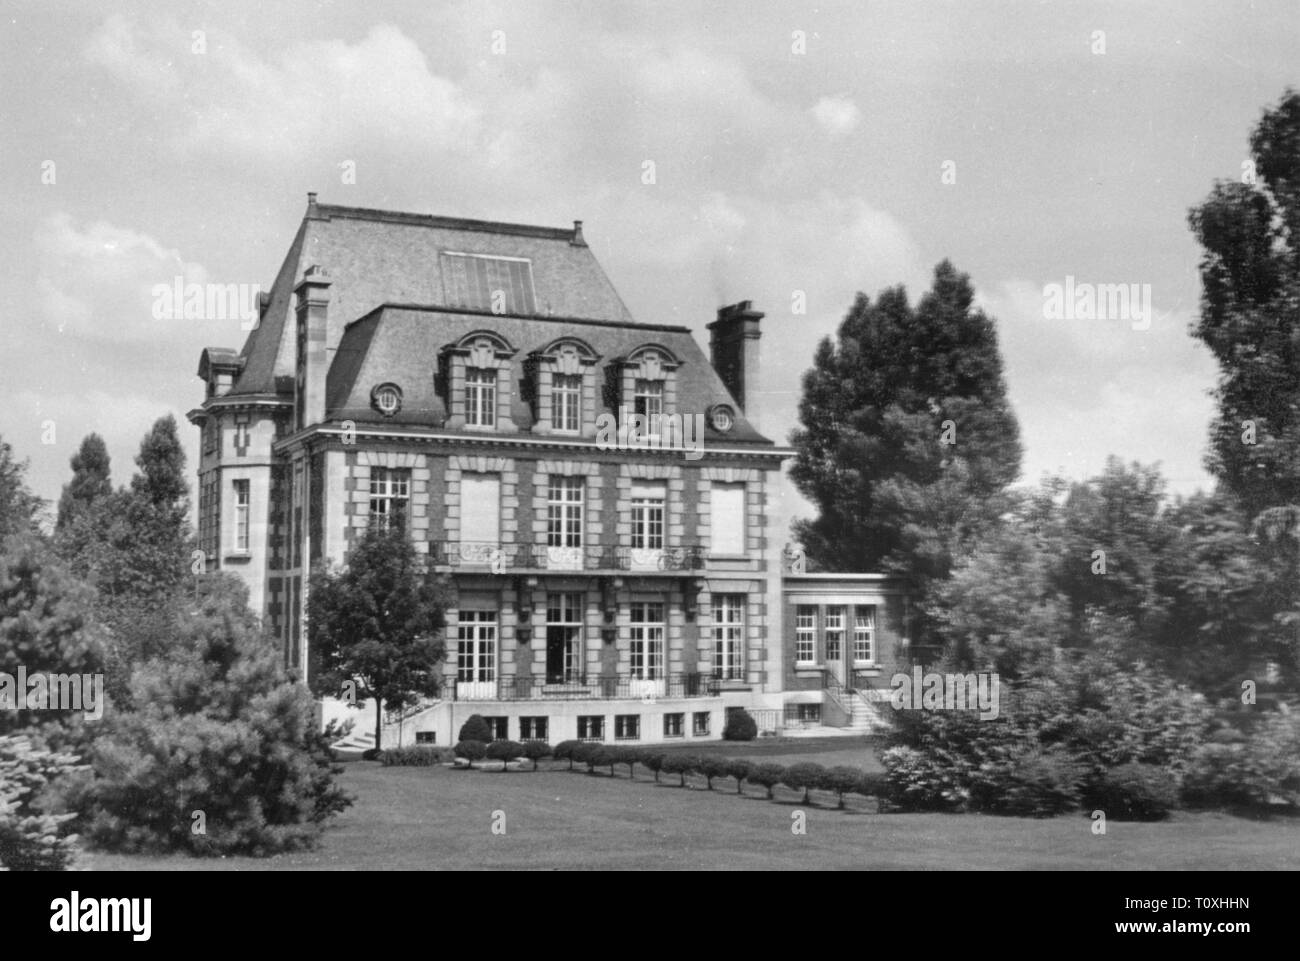 Second World War / WWII, communications zone, villa in Mouvaux, France, quarter of the 3rd Luftwaffe War Correspondent Company 3, exterior view, 1940, building, buildings, house, houses, German Air Force, war reporter, propaganda company, companies, propaganda corps, Wehrmacht, armed forces, 20th century, 1940s, second, 2nd, world war, world wars, communications zone, back area, rear echelon, villa, mansion, villas, mansions, quarter, quarters, historic, historical, Additional-Rights-Clearance-Info-Not-Available Stock Photo